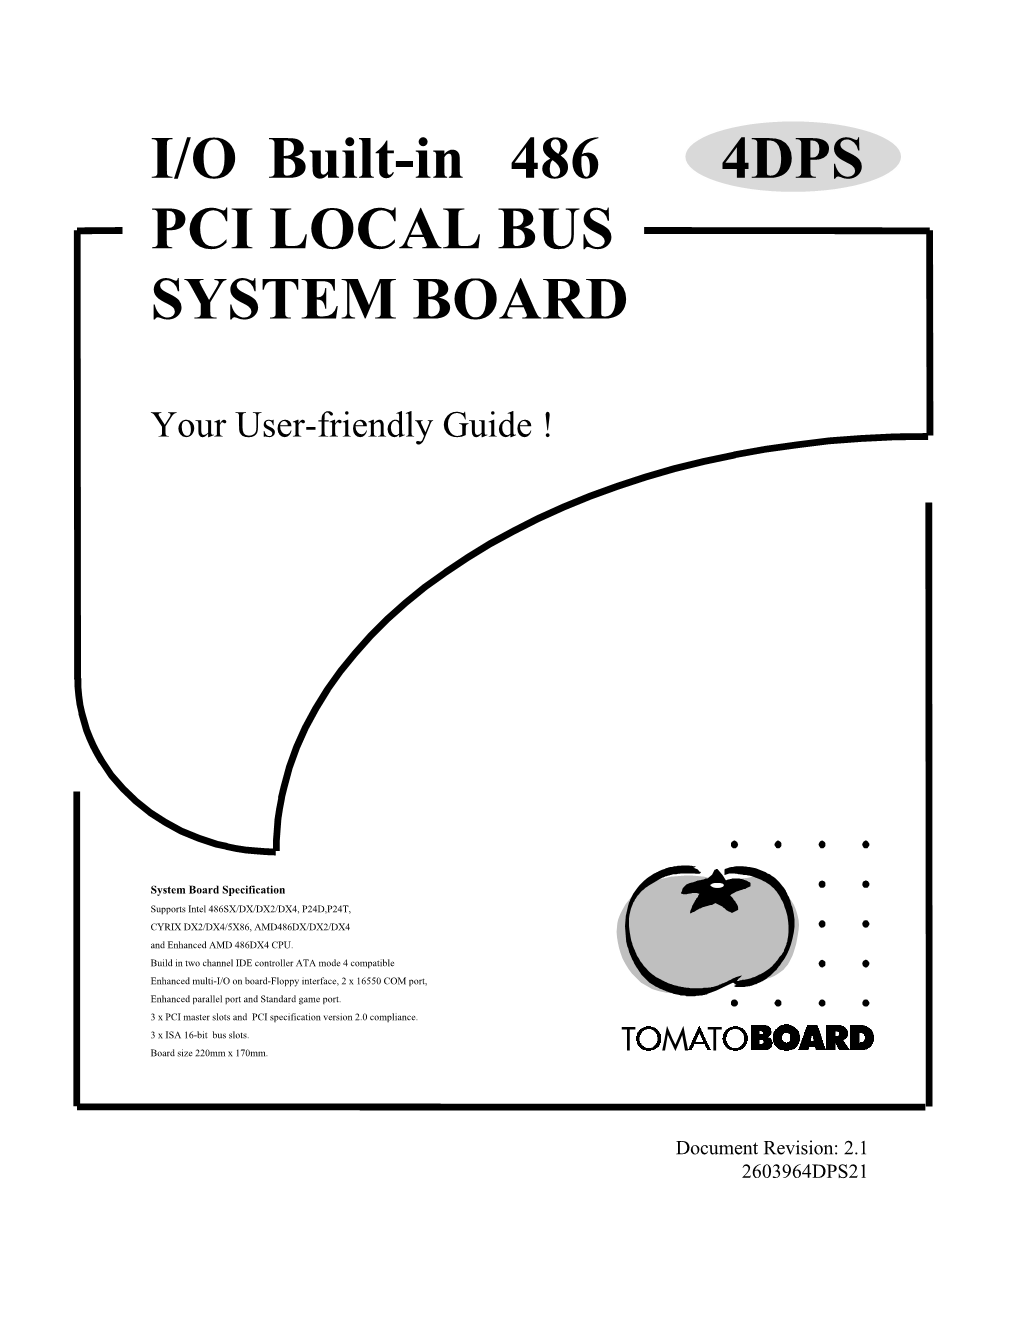 I/O Built-In 486 4DPS PCI LOCAL BUS SYSTEM BOARD